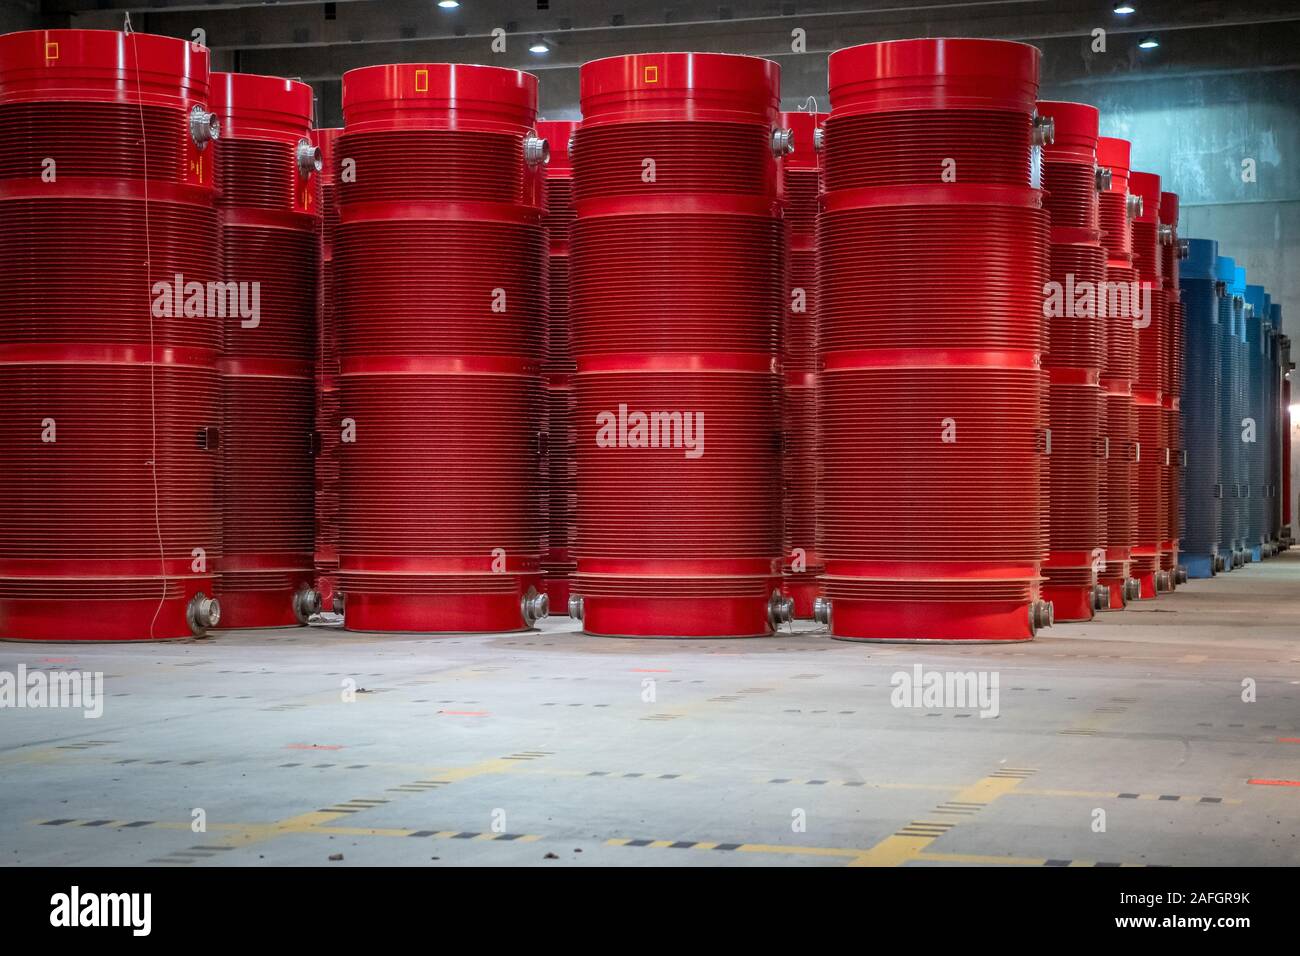 Gorleben, Germany. 11th Dec, 2019. Containers with high-level radioactive waste are in interim storage. The Gorleben nuclear waste storage facility is an interim storage facility for spent fuel elements and high-level radioactive waste. To date, 13 Castor transports with highly radioactive material have reached the transport container warehouse between 1995 and 2011. Until a repository has been found, the nuclear waste is to be temporarily stored there. Credit: Sina Schuldt/dpa/Alamy Live News Stock Photo